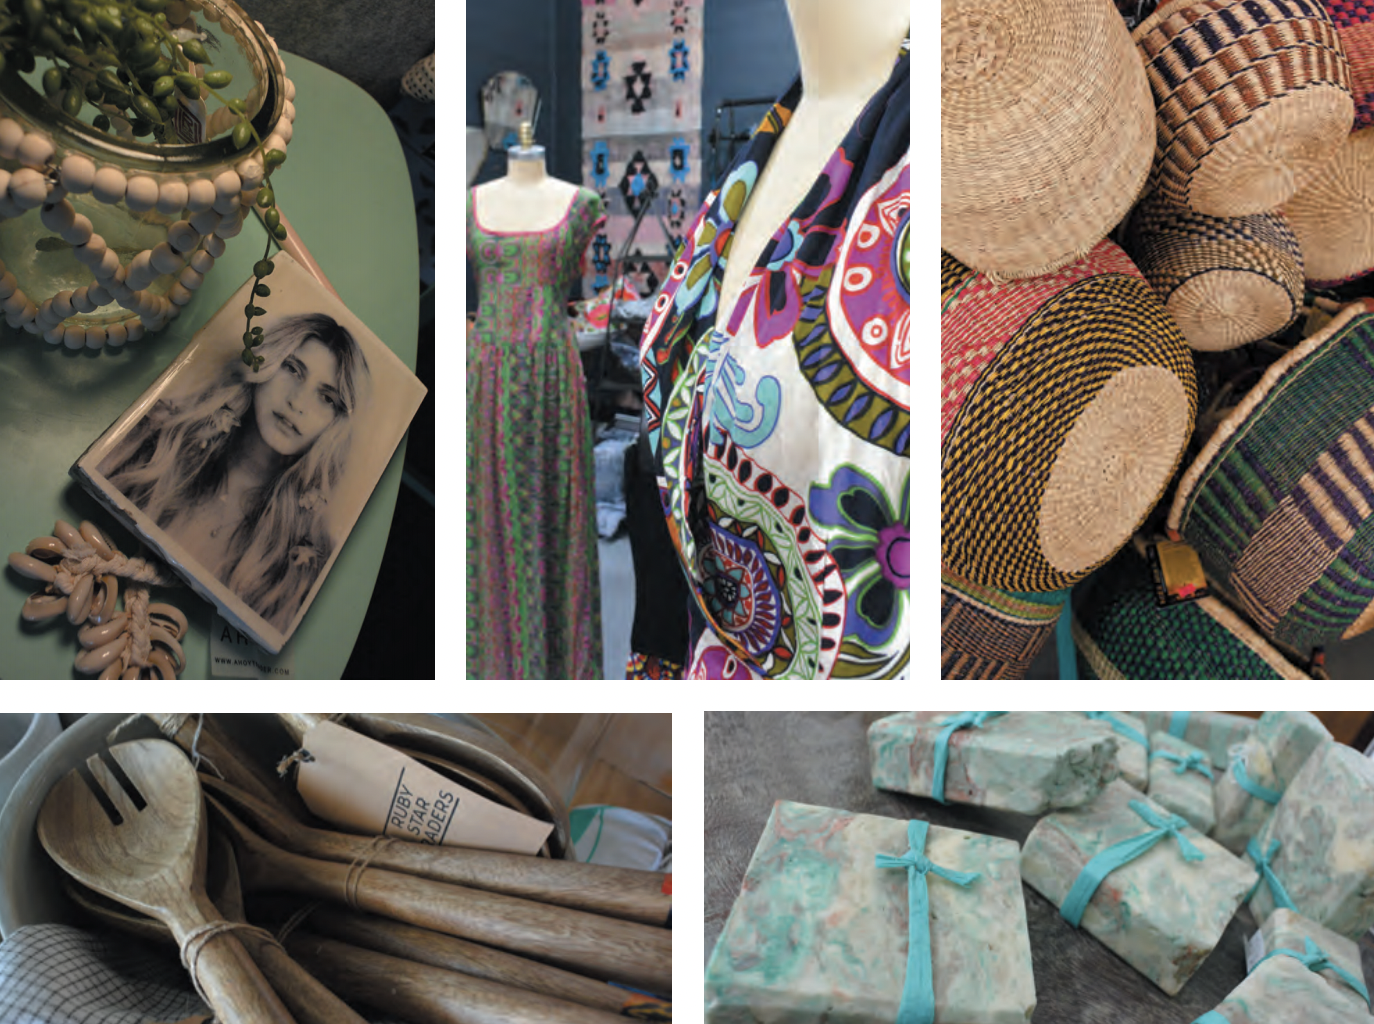 Handmade goods on offer in the Kempsey New South Wales region.